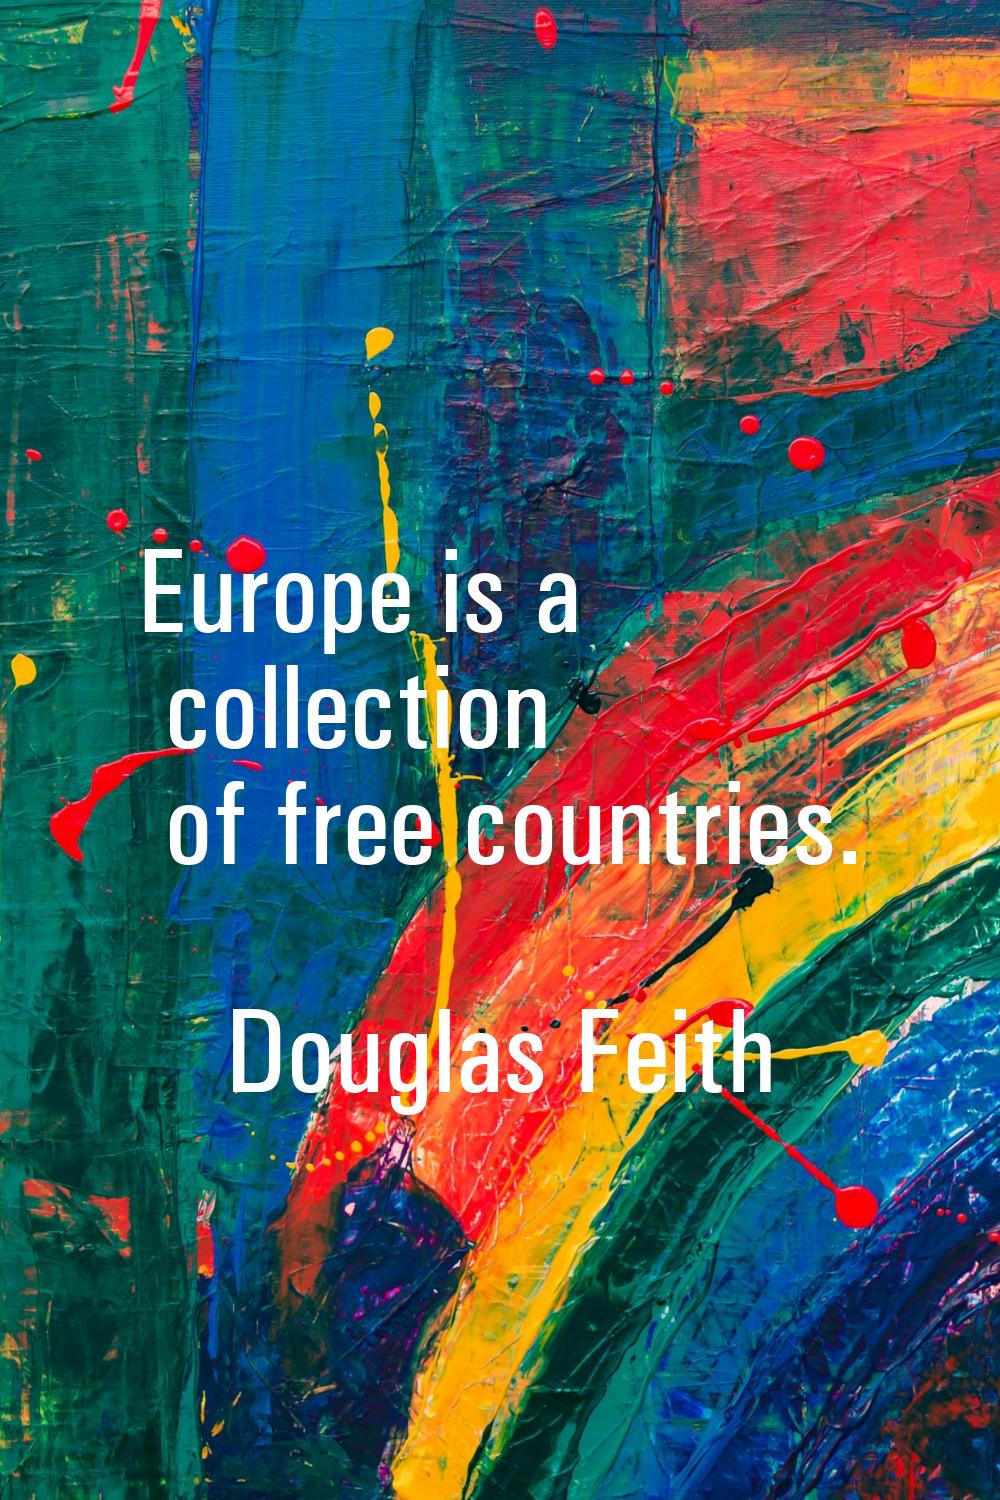 Europe is a collection of free countries.